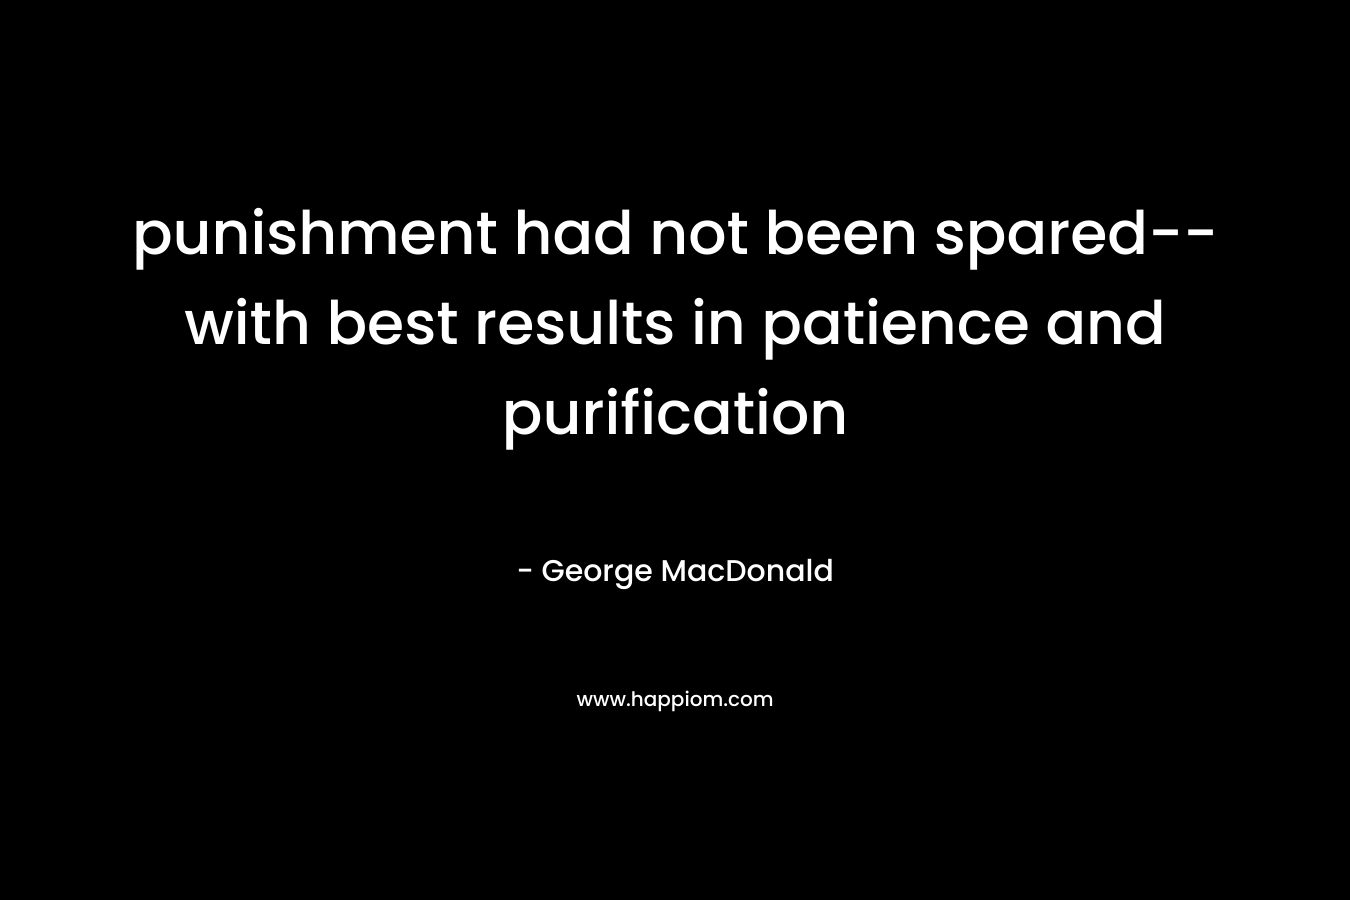 punishment had not been spared--with best results in patience and purification